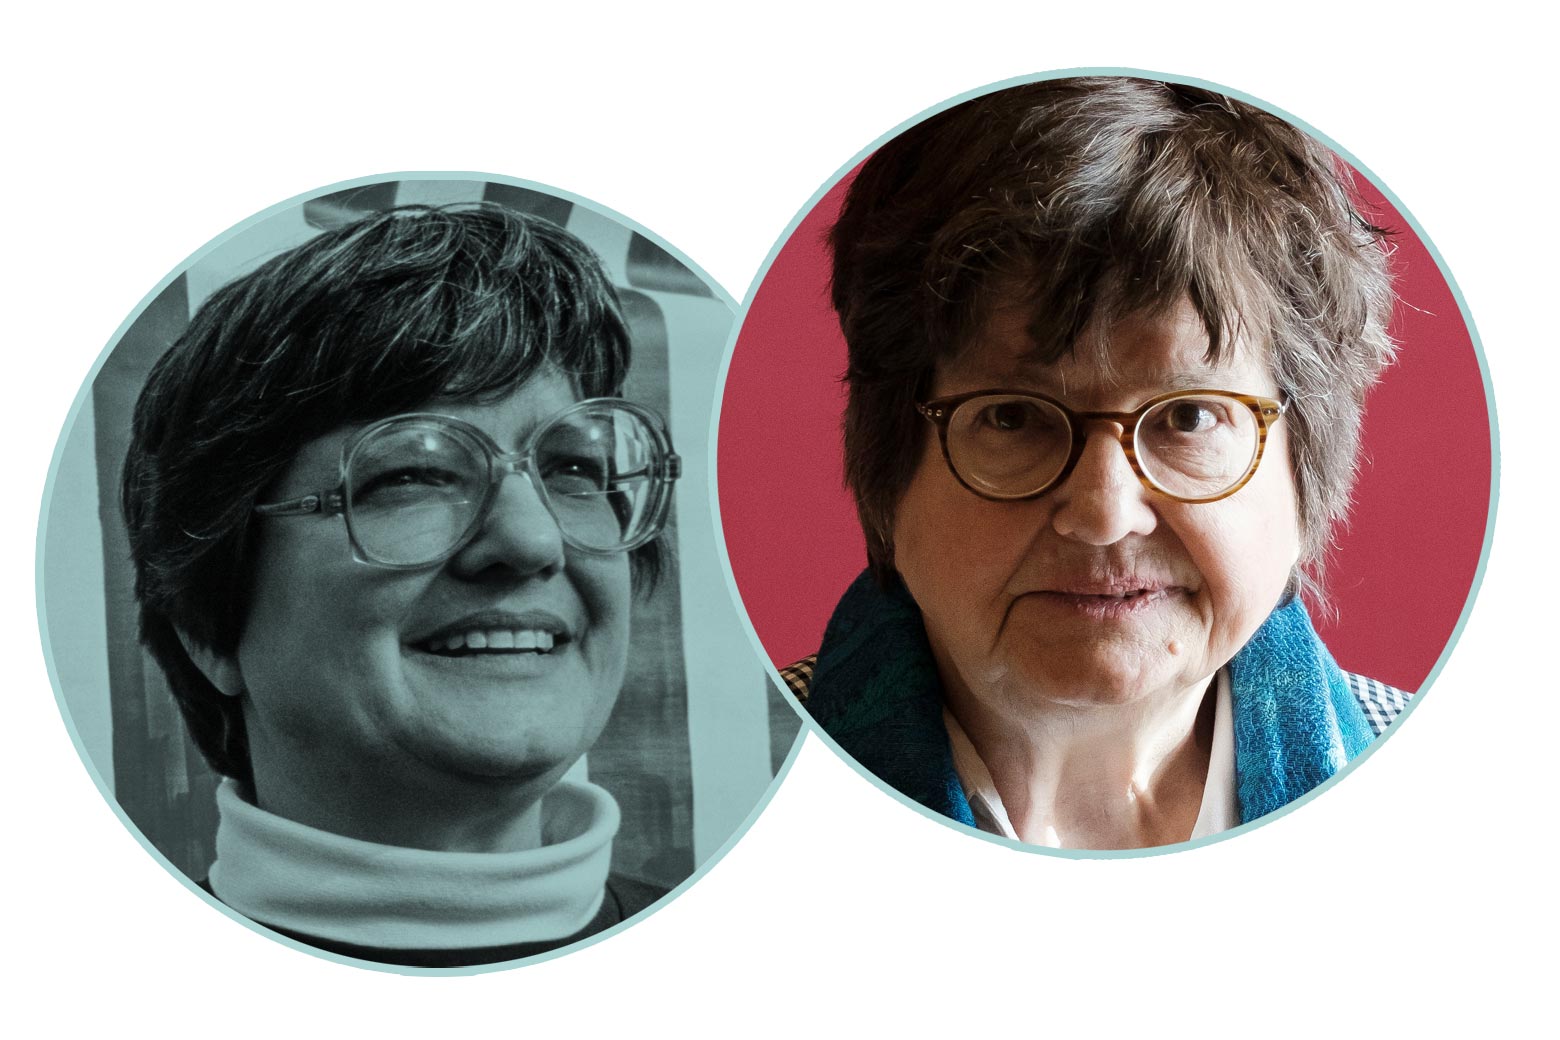 A black-and-white headshot of Prejean in her 40s and a color headshot of Prejean around age 79.